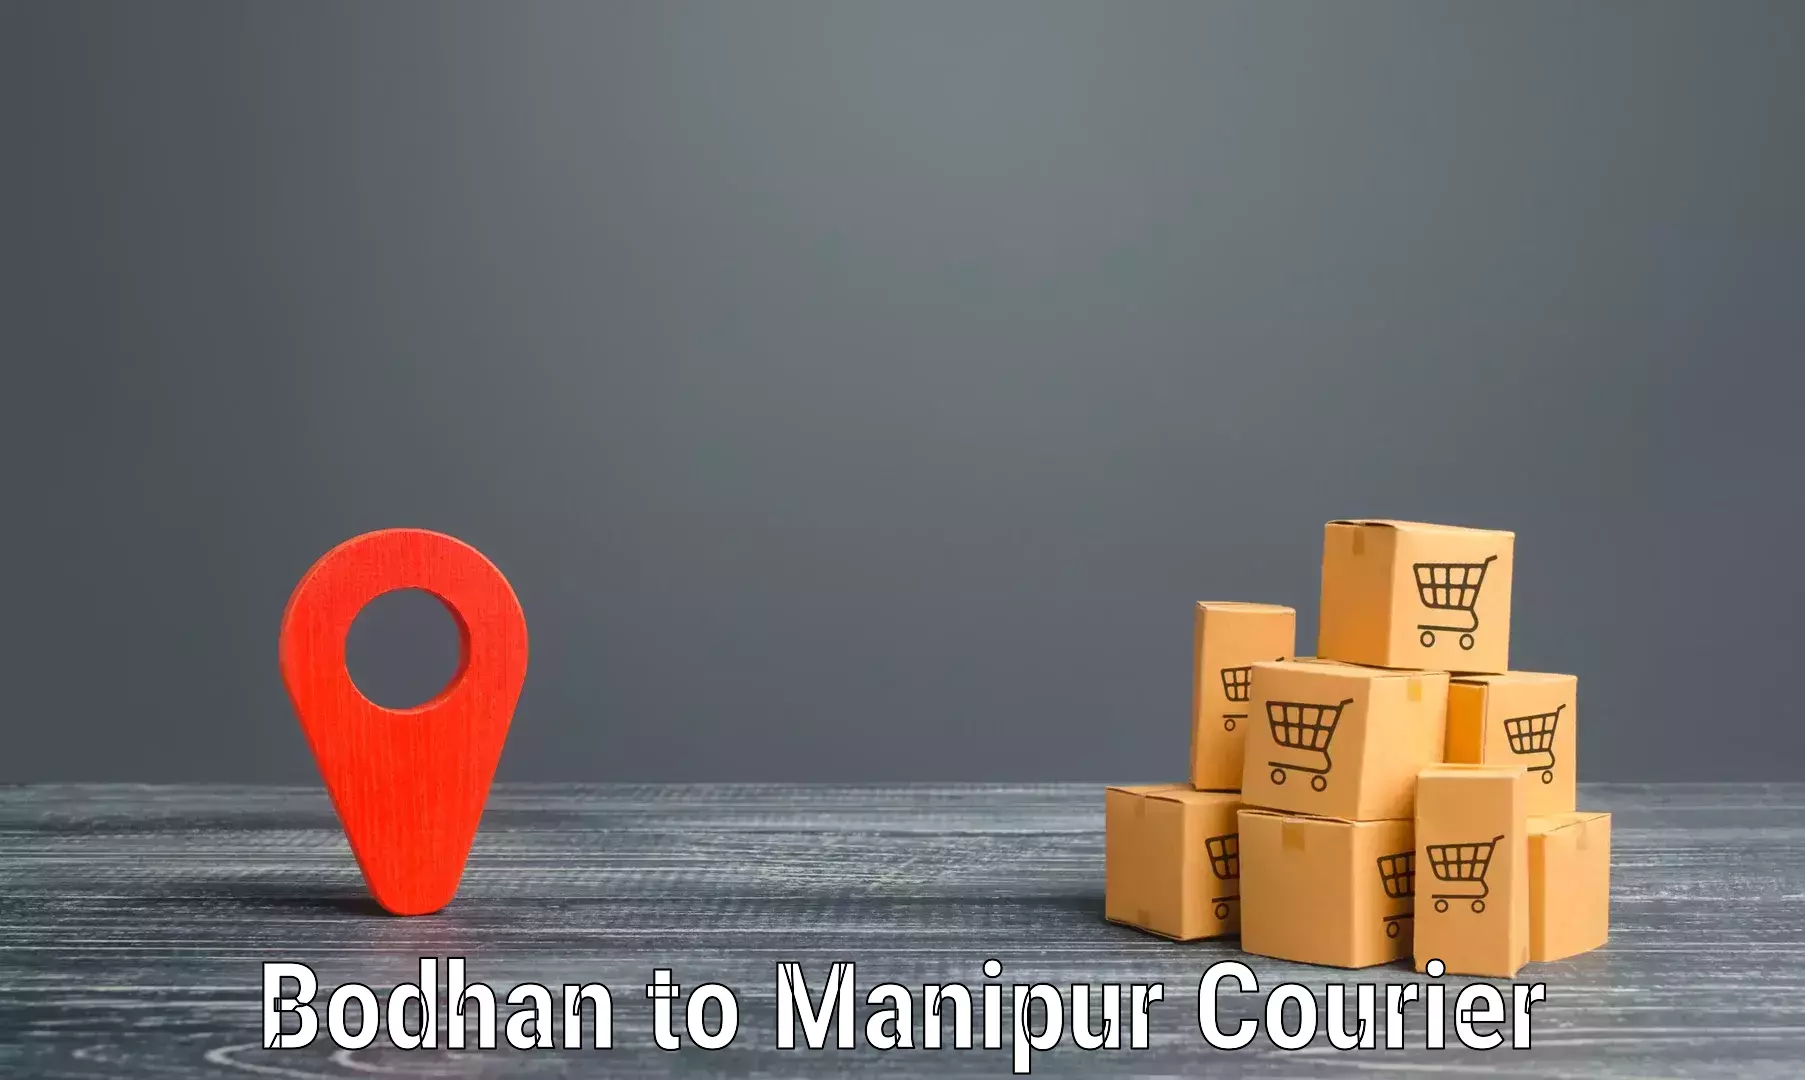 Smart logistics solutions Bodhan to Manipur